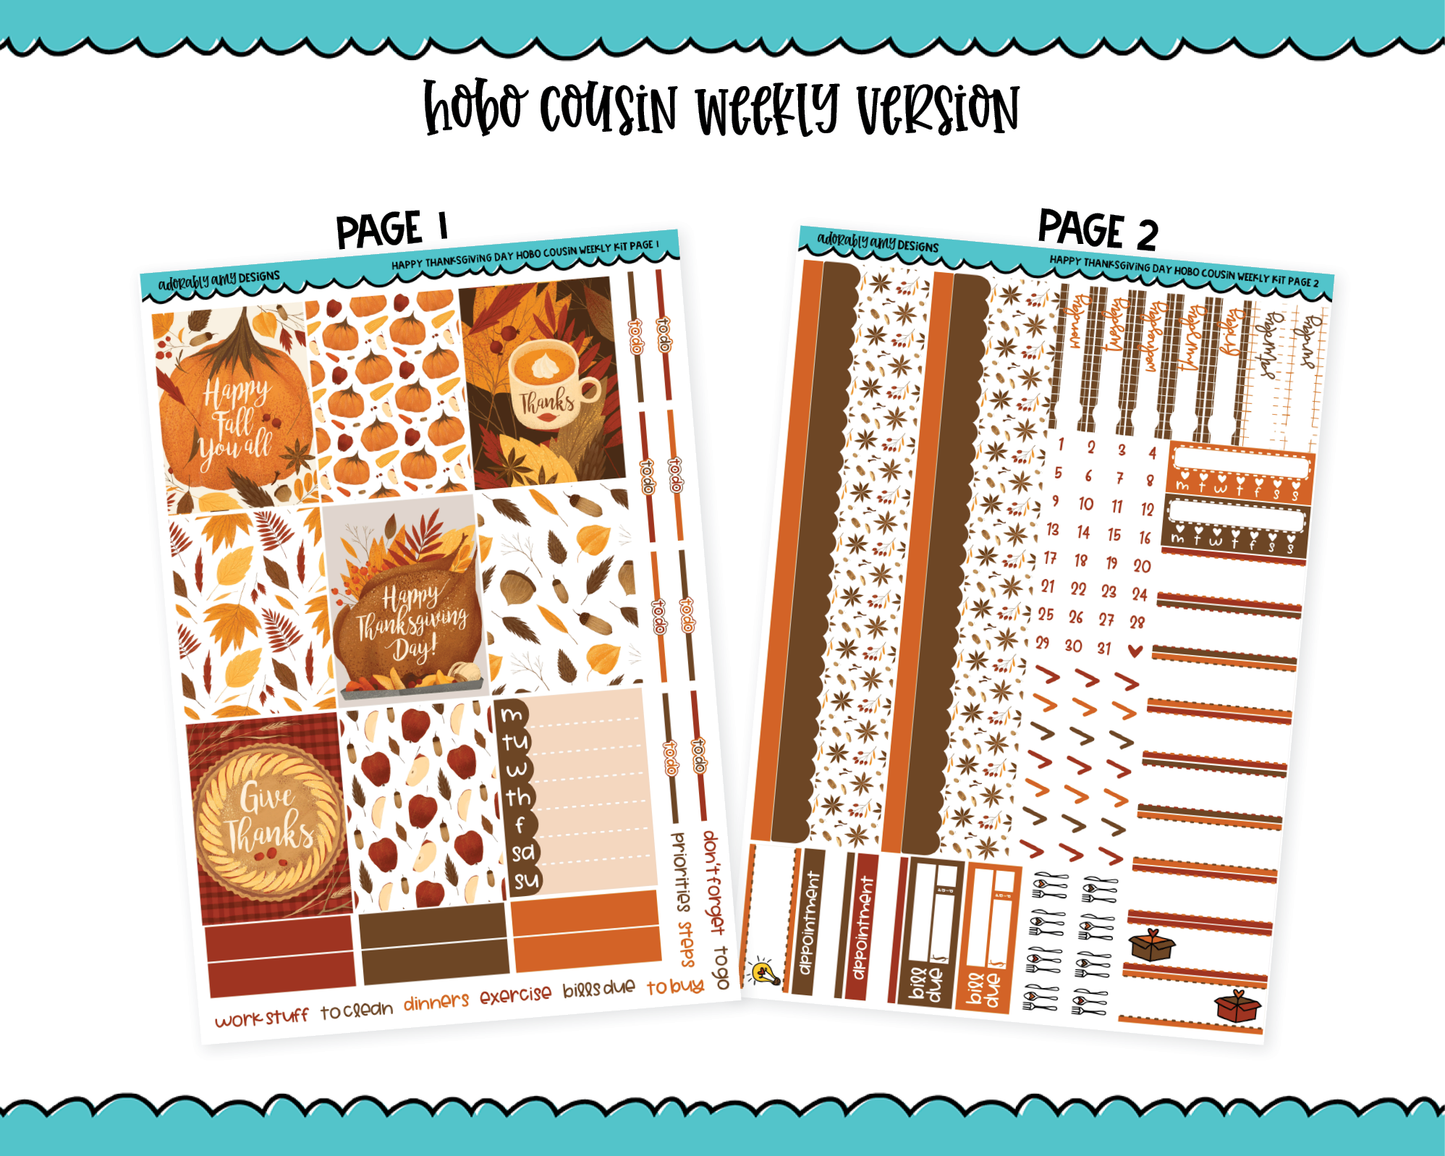 Hobonichi Cousin Weekly Happy Thanksgiving Day Thanksgiving Themed Planner Sticker Kit for Hobo Cousin or Similar Planners